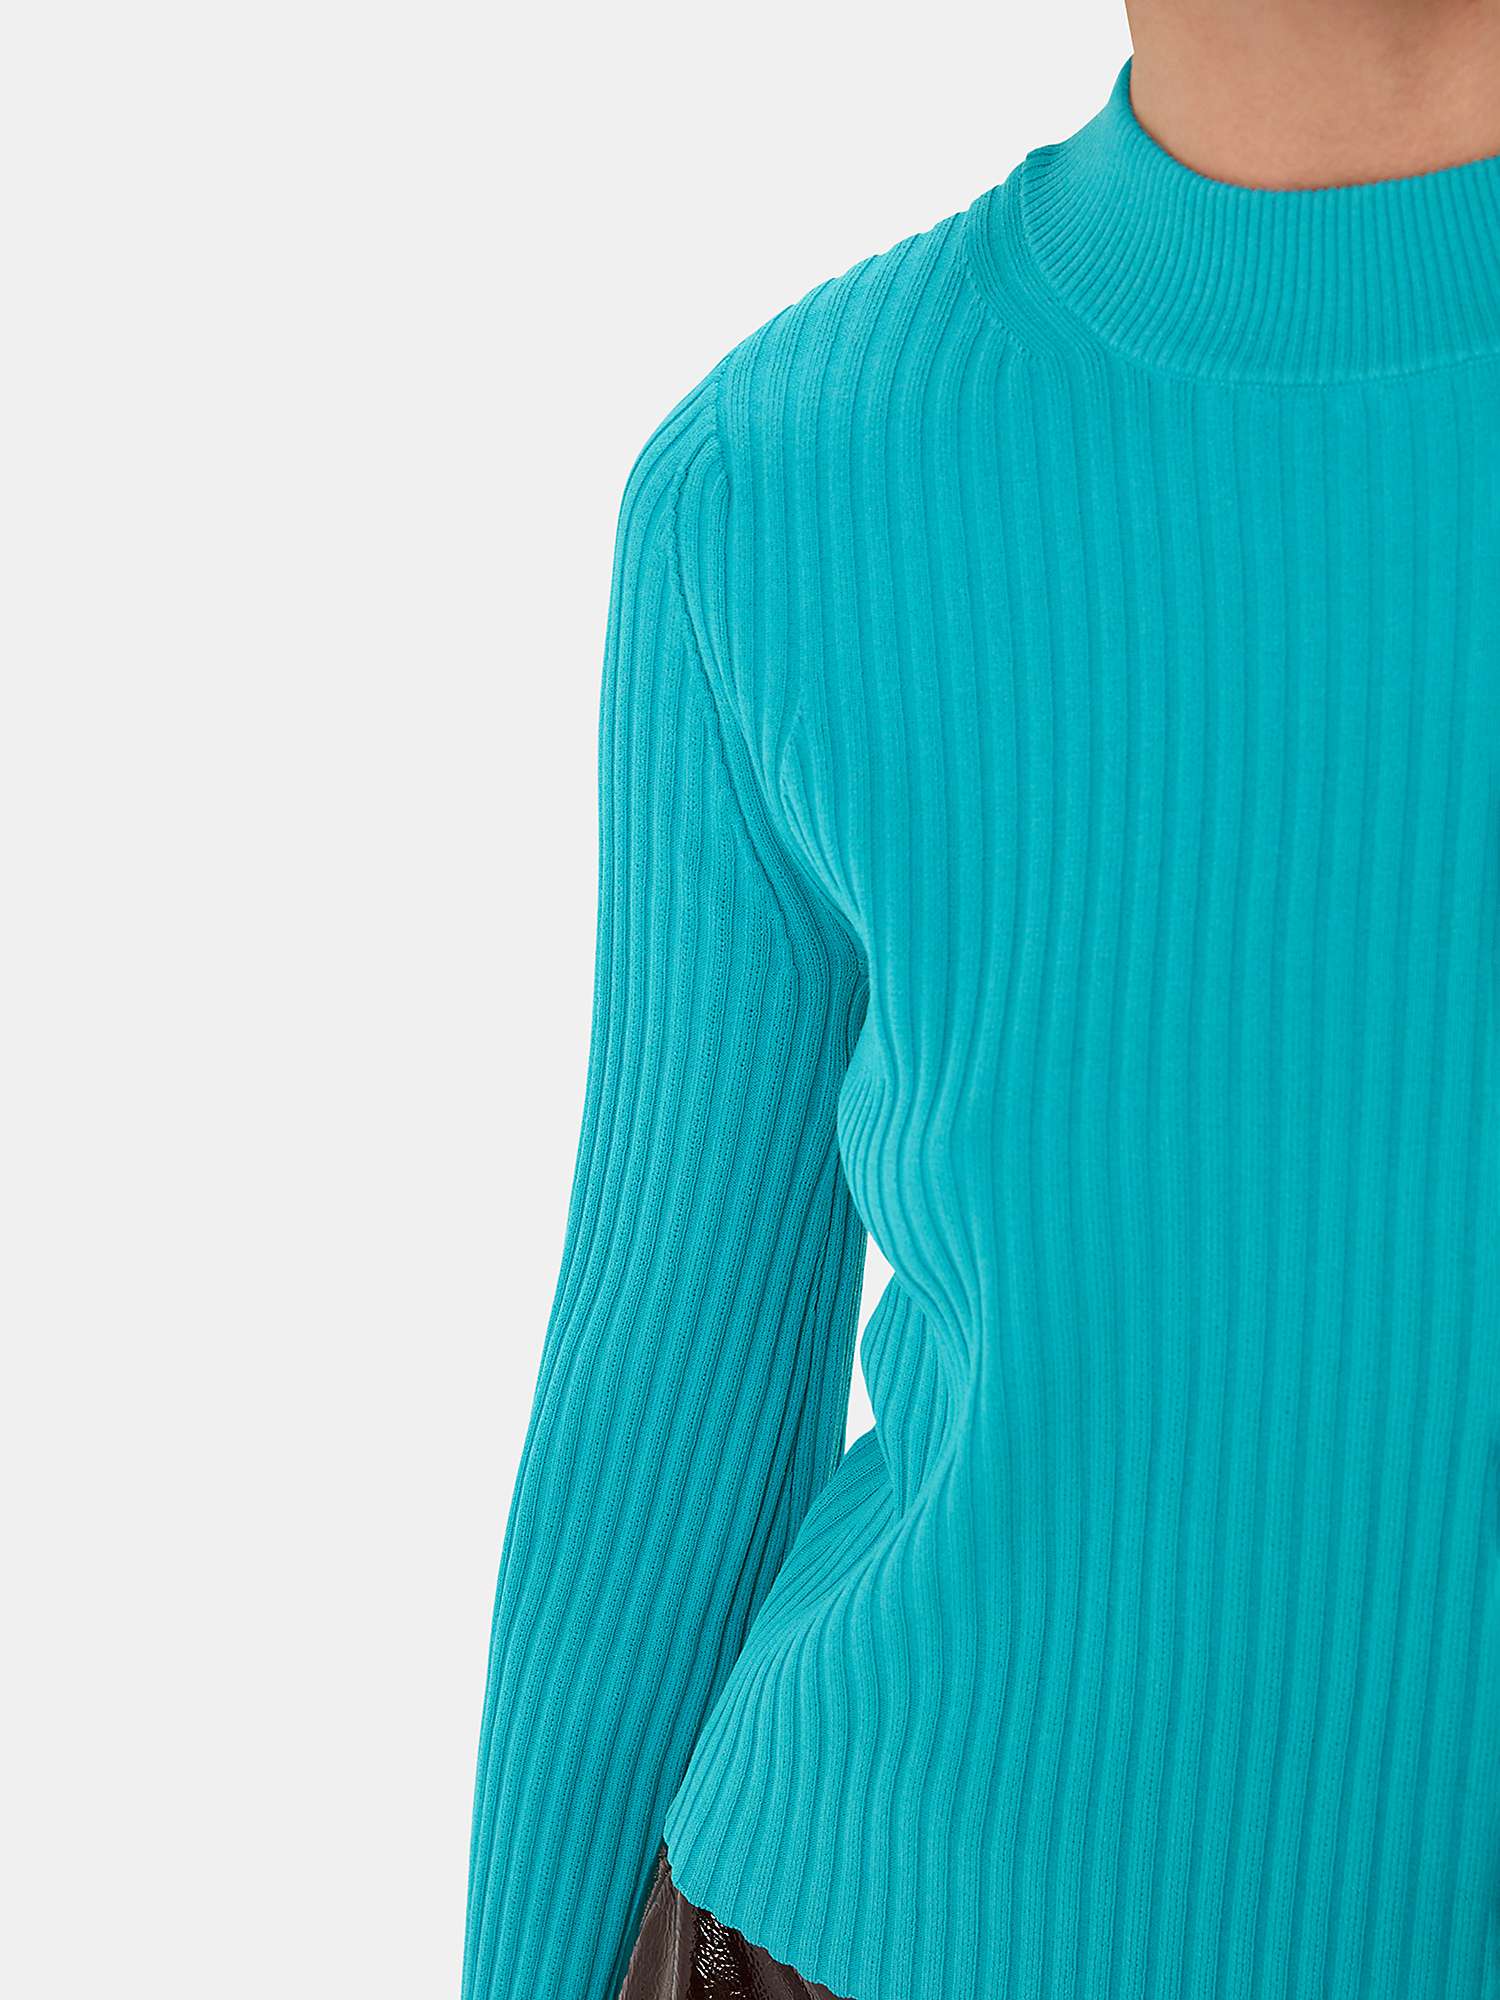 Whistles Fluted Sleeve Jumper, Turquoise at John Lewis & Partners